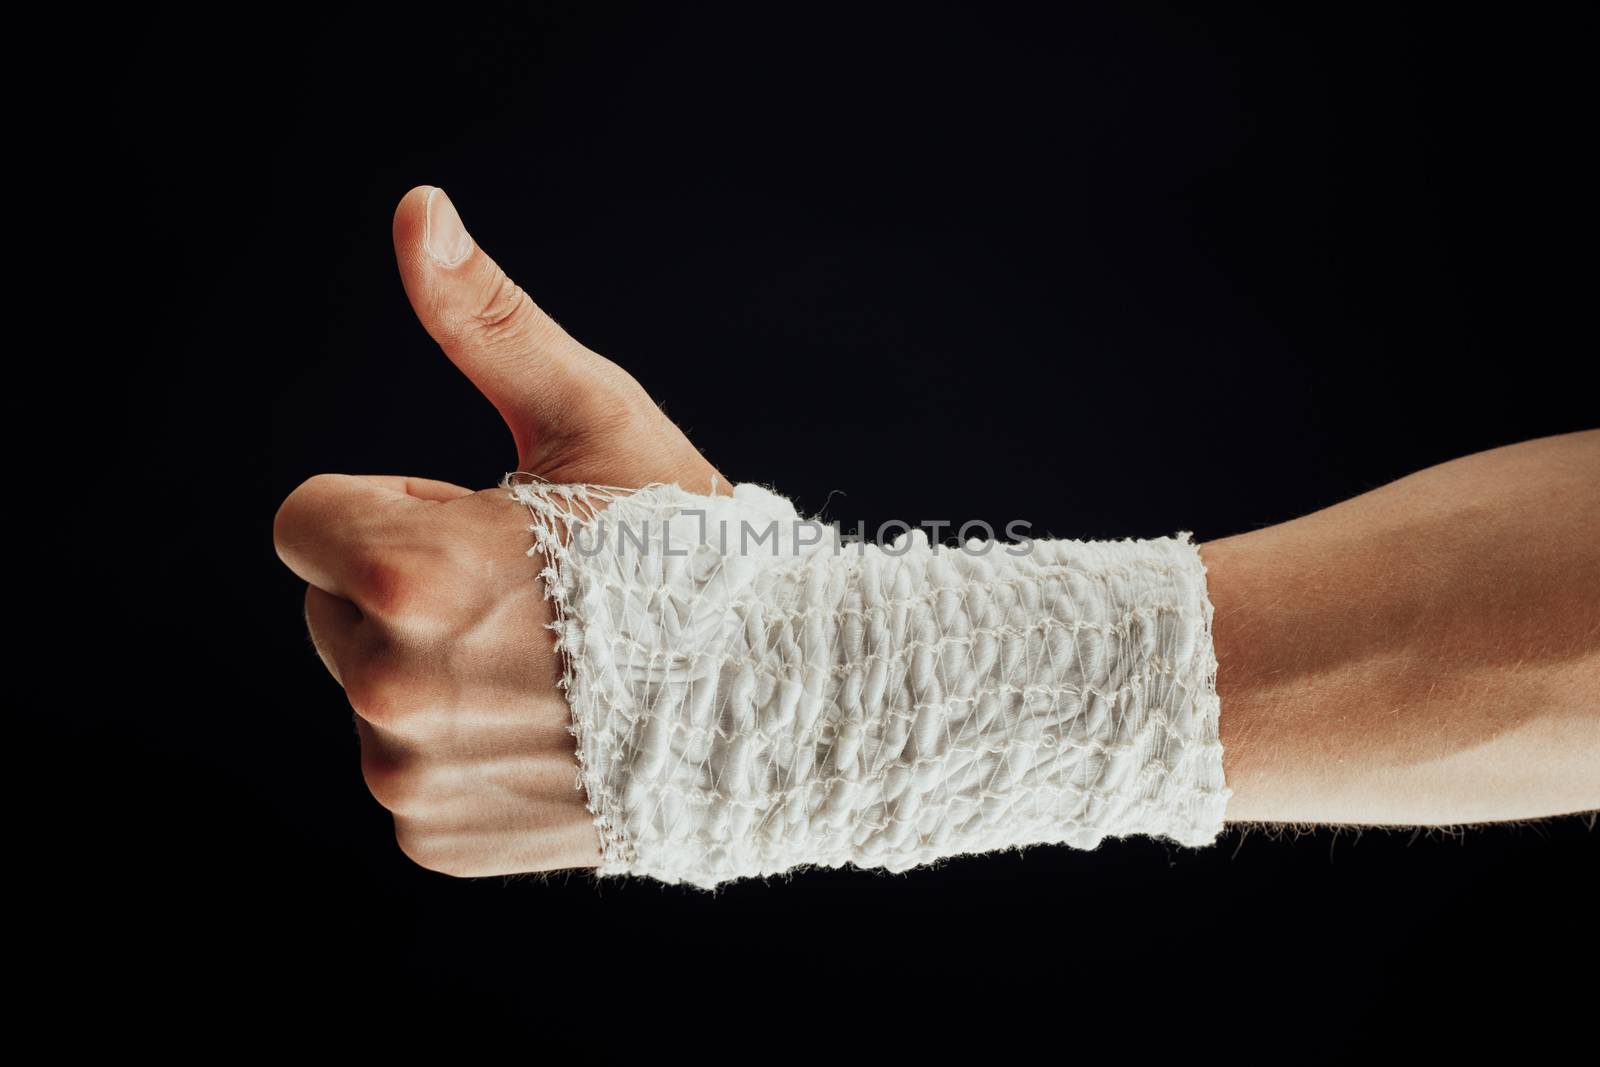 wrist wrapped with healing bandage, thumbs up, isolated on black